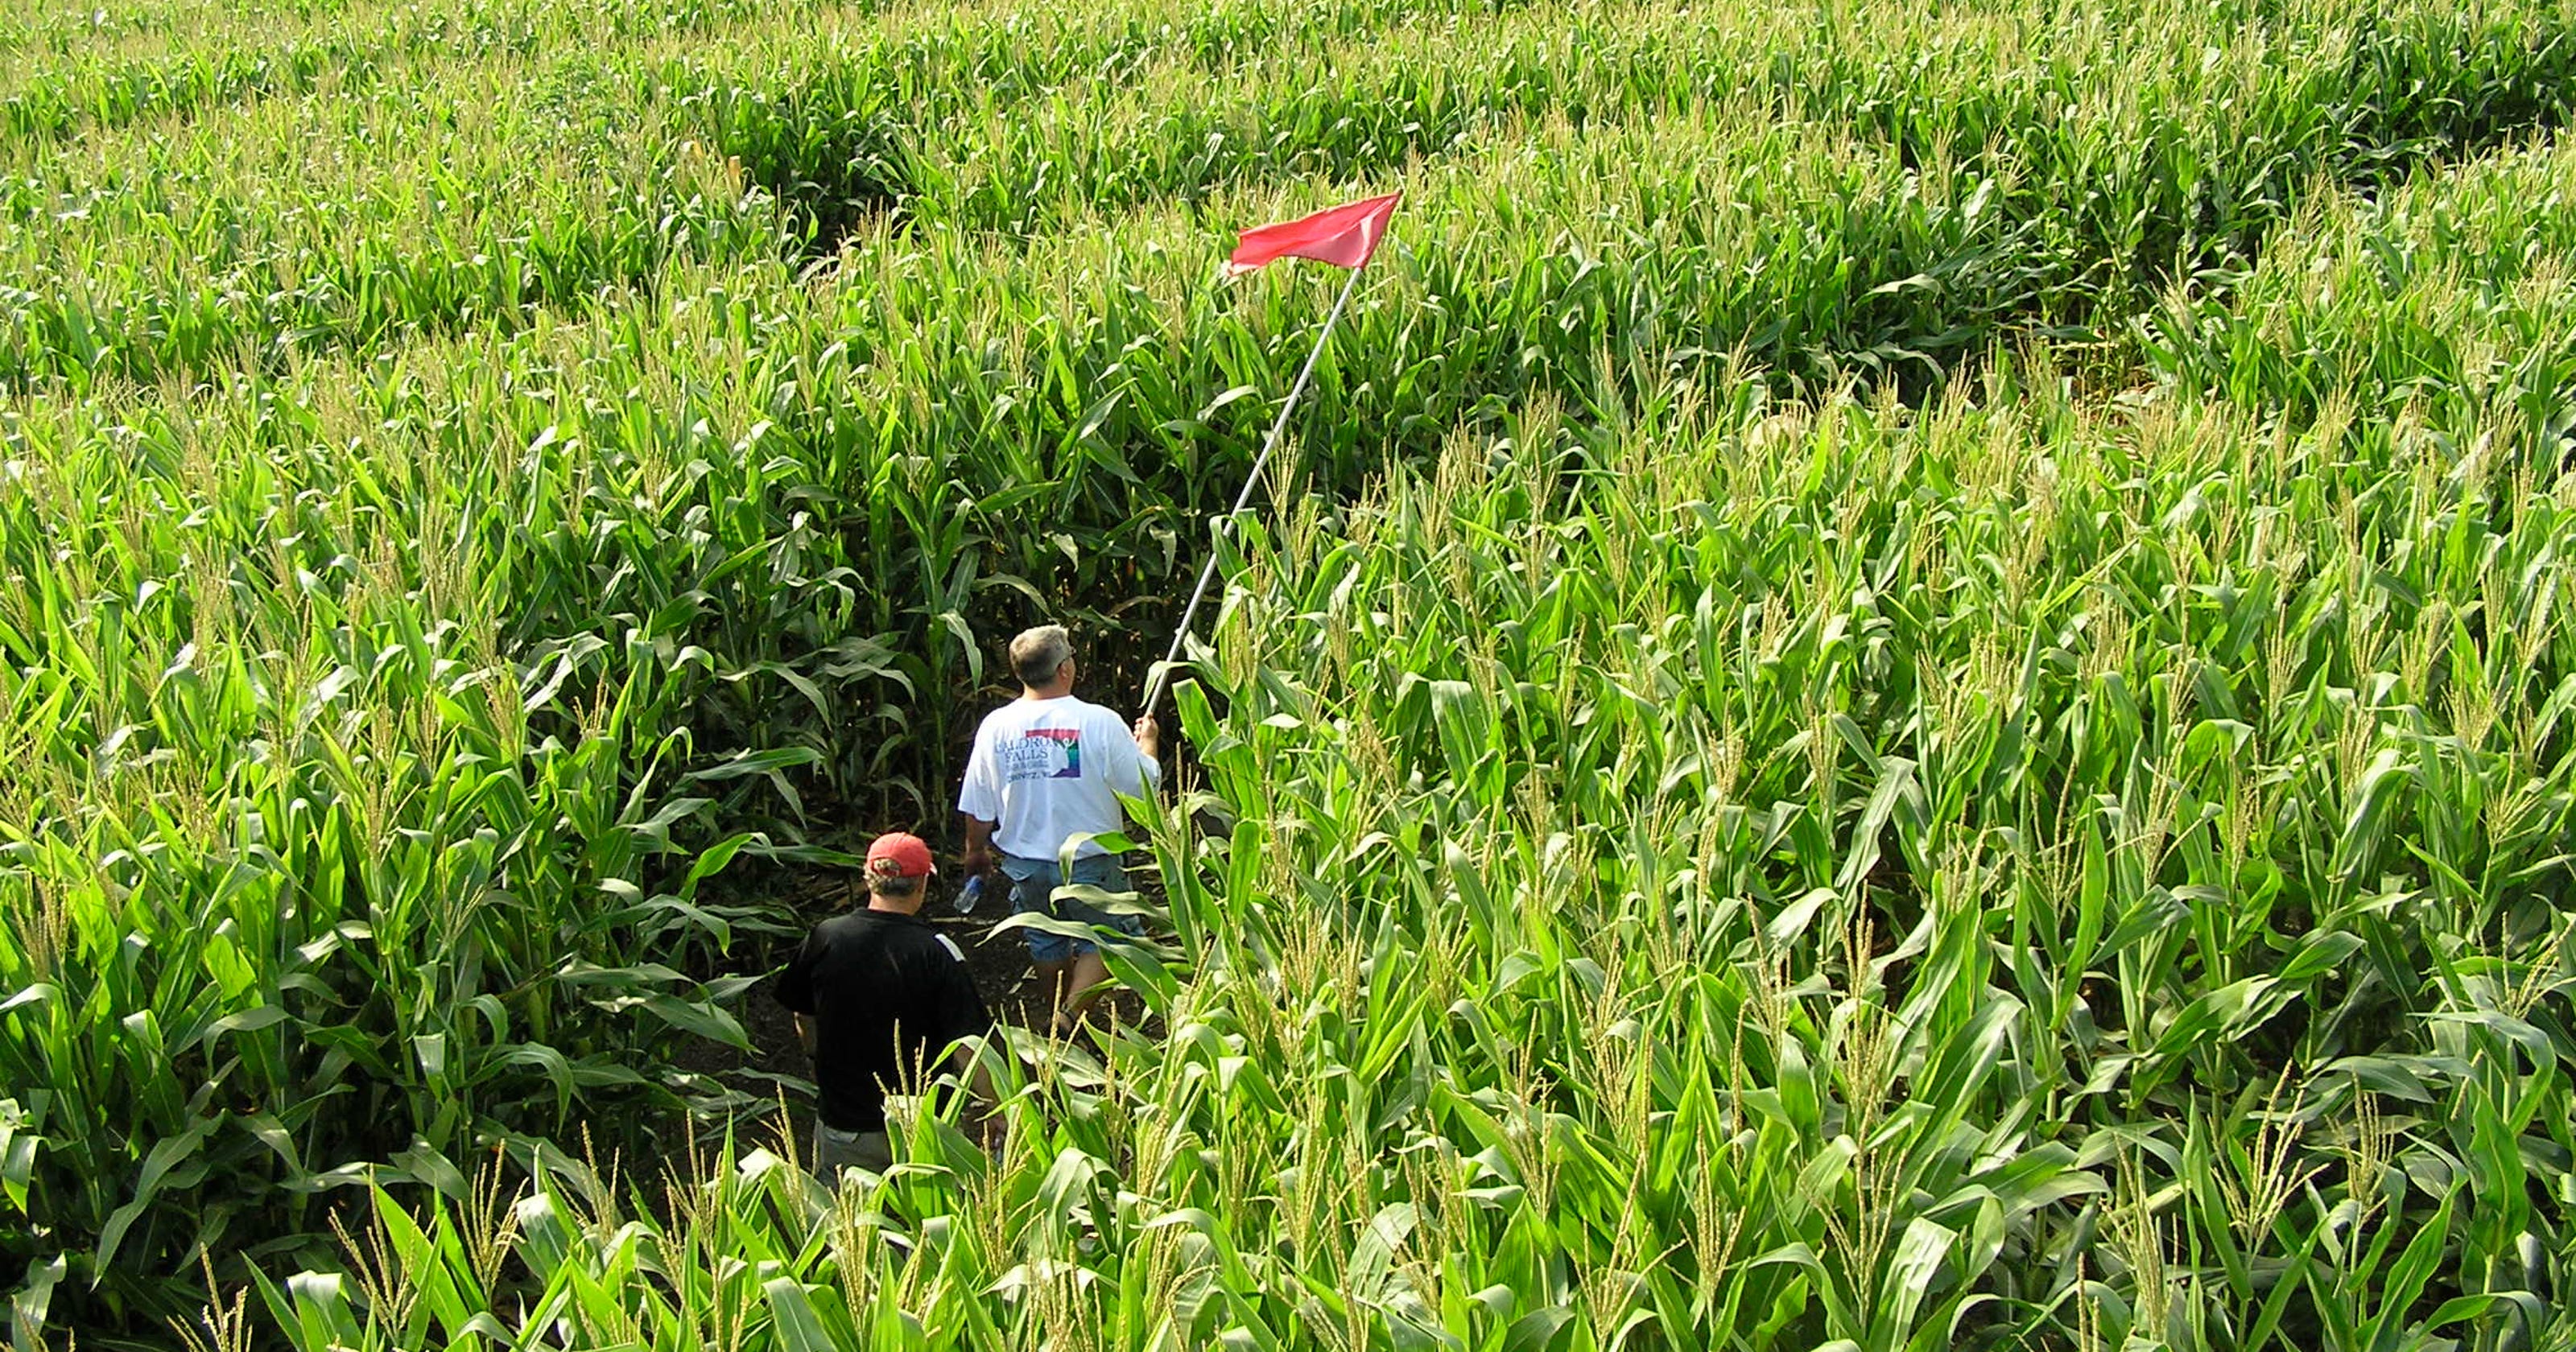 3-year-old lost in corn maze, family didn't notice until next day